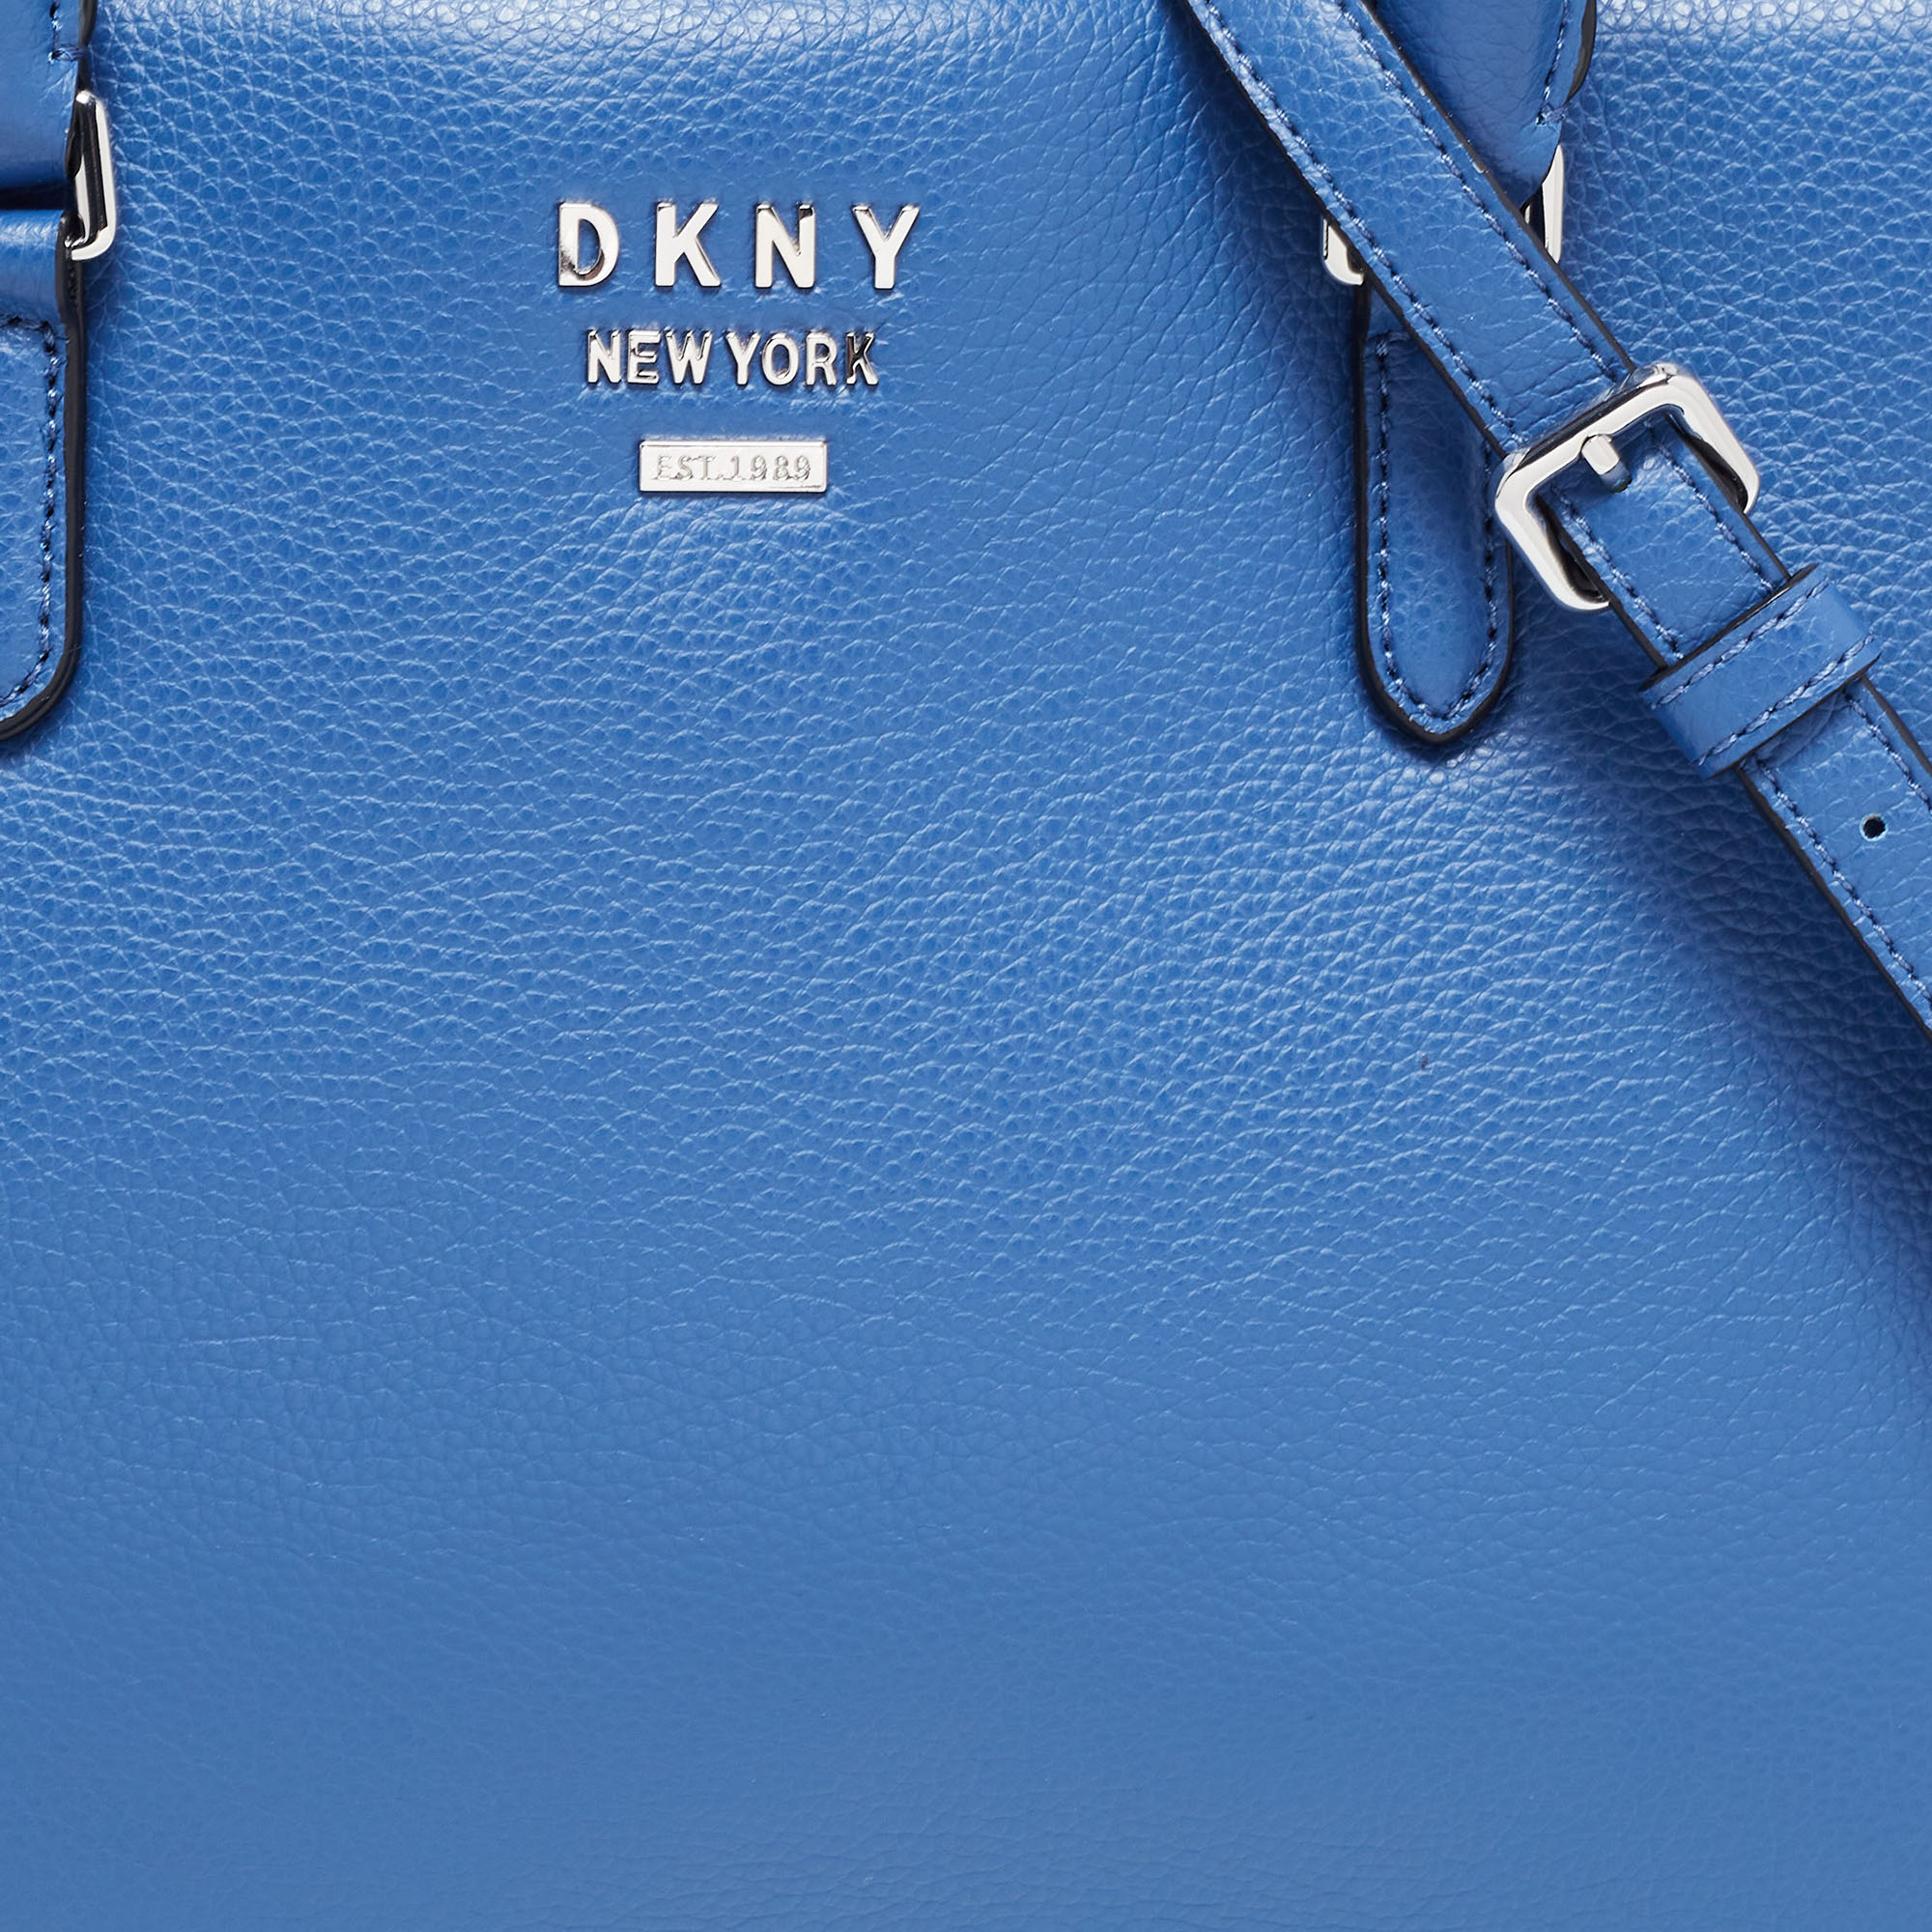 DKNY Blue Leather Whitney Work Tote